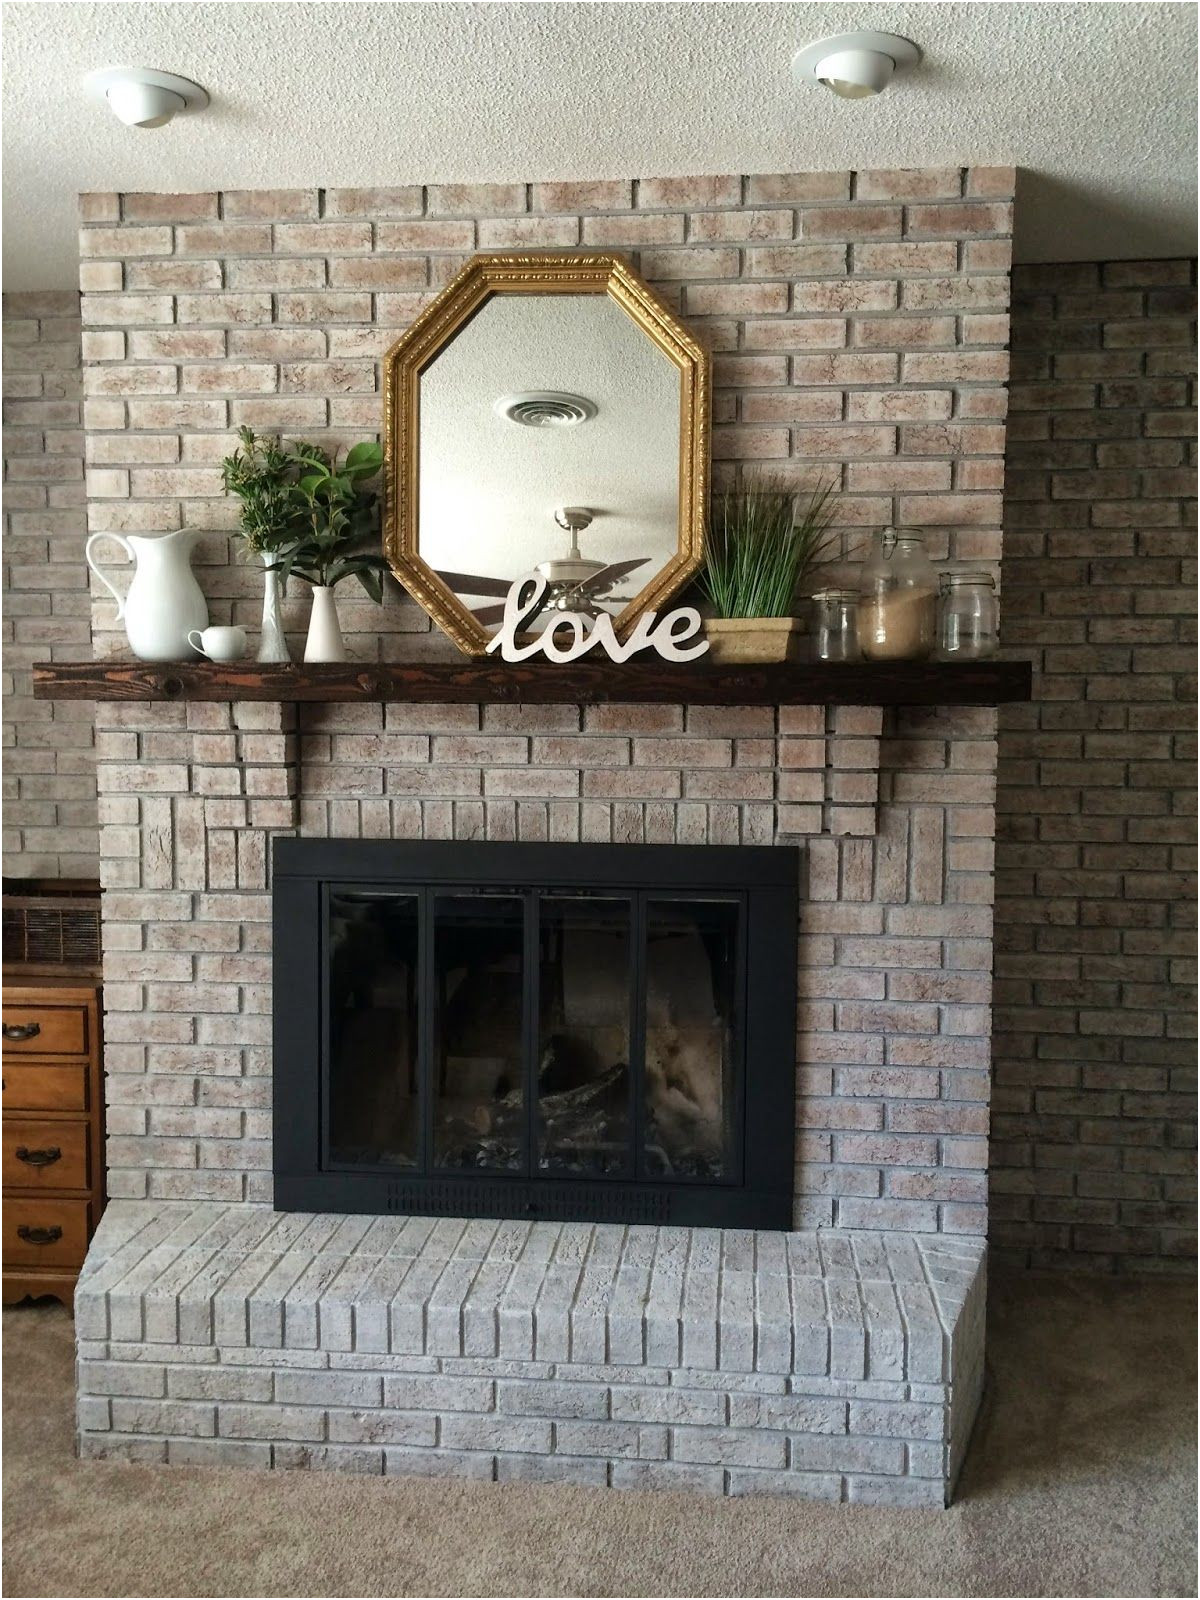 Painting A Brick Fireplace Ideas New White Washing Brick with Gray Beige Walking with Dancers